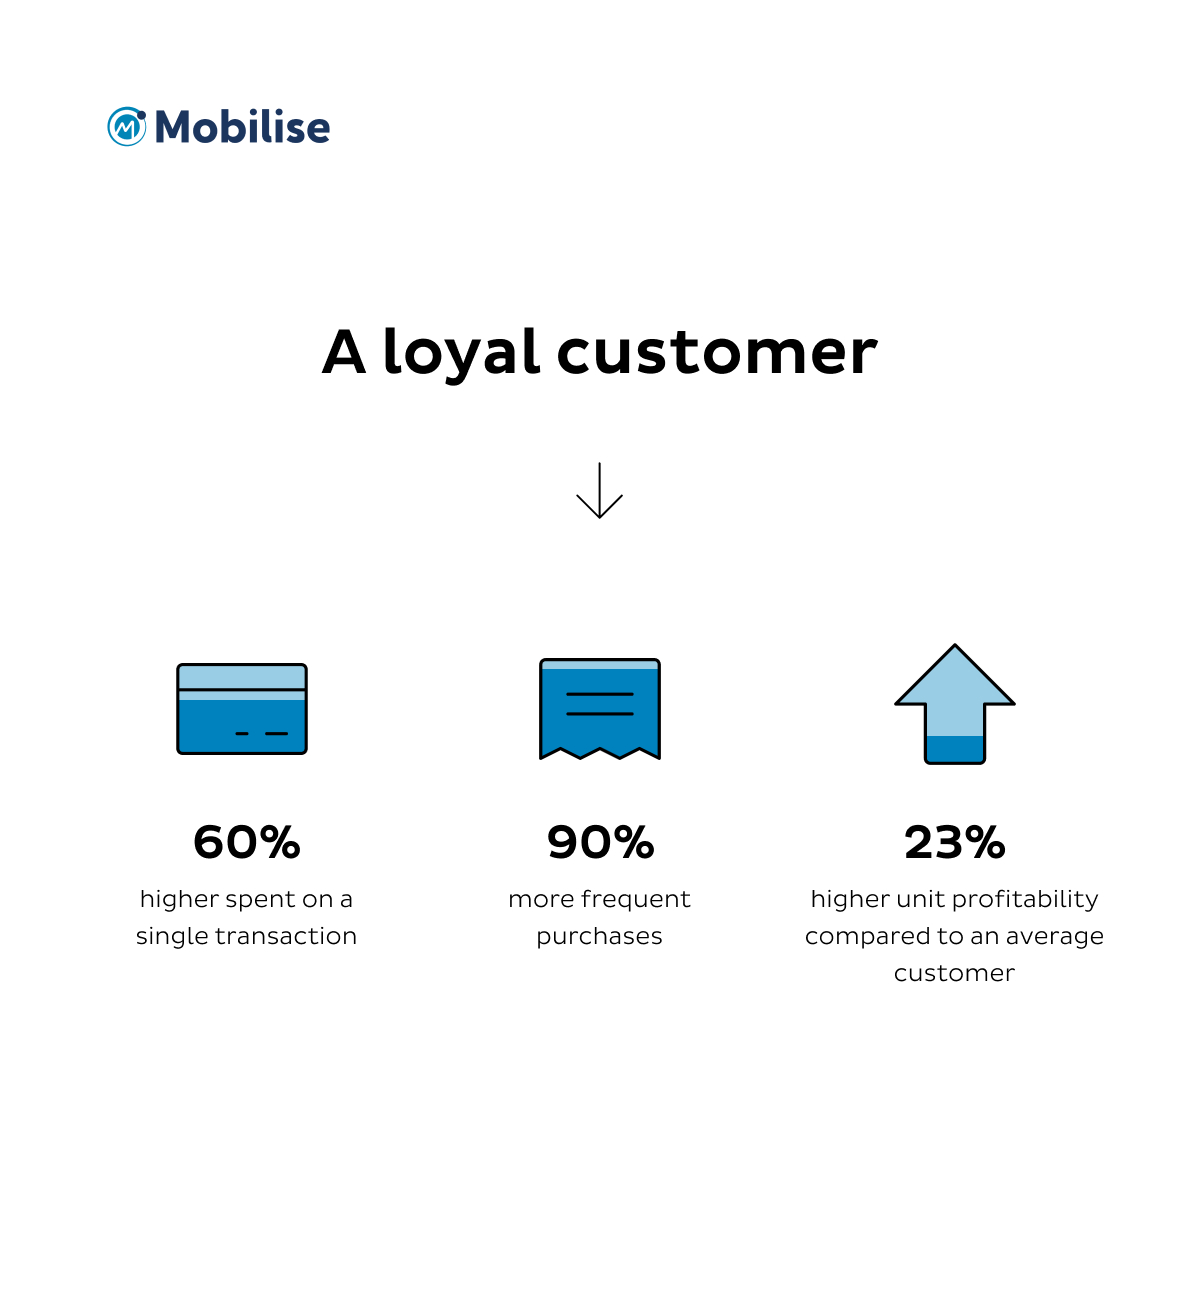 Loyal customers that have a good customer experience in telecom - 60% spend higher on a single transaction, 90% purchase more frequently and 23% has a higher unit profitability compared to an average customer.